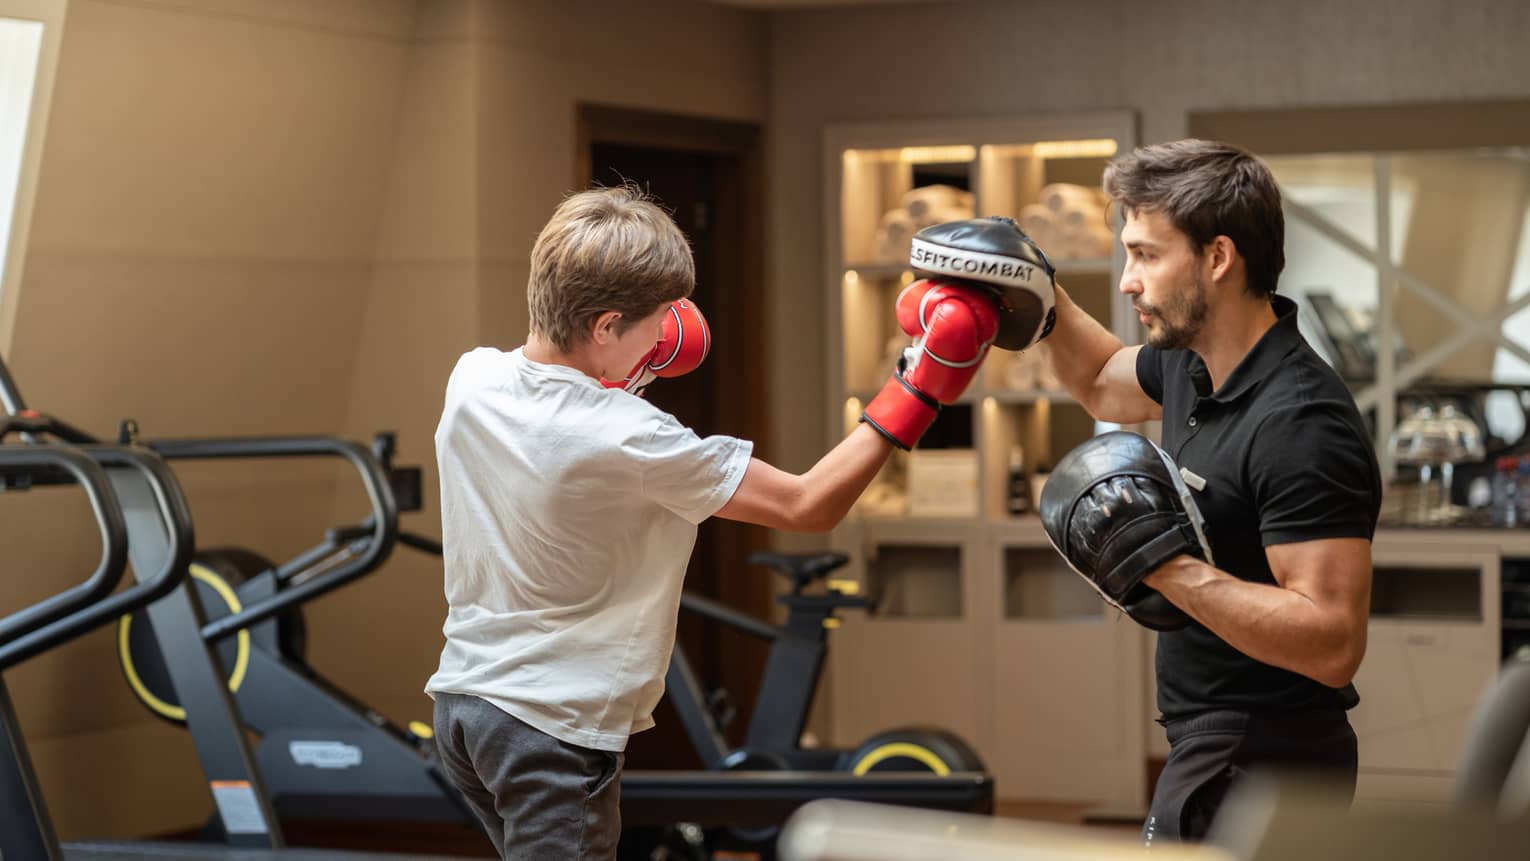 Teenager in red boxing gloves sparring with trainer in black boxing gloves in gym